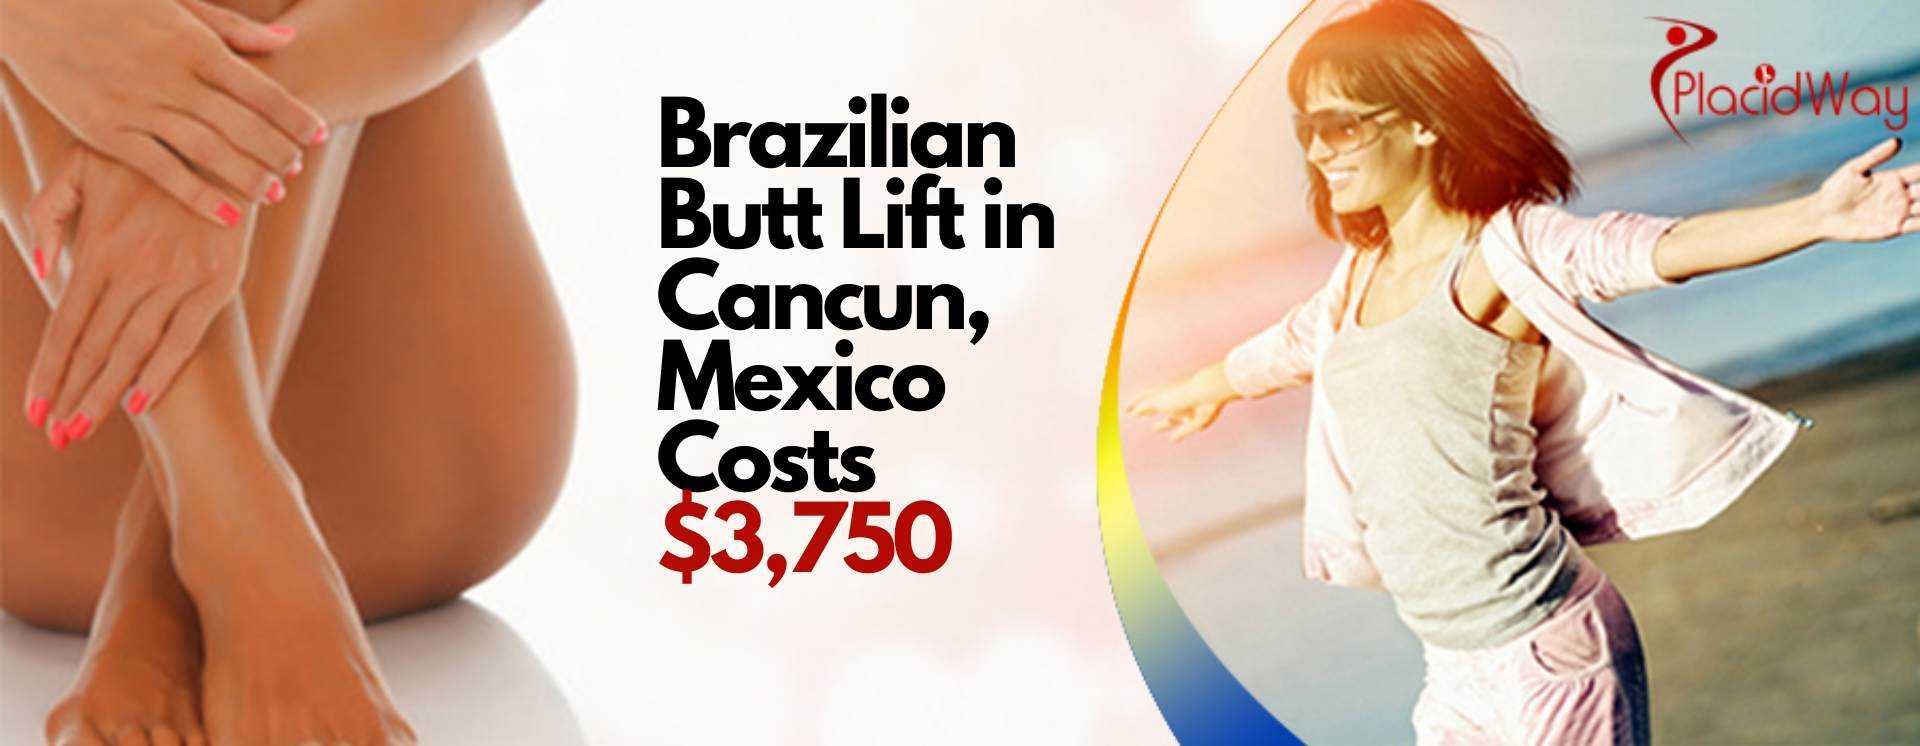 BBL Cost in Cancun, Mexico